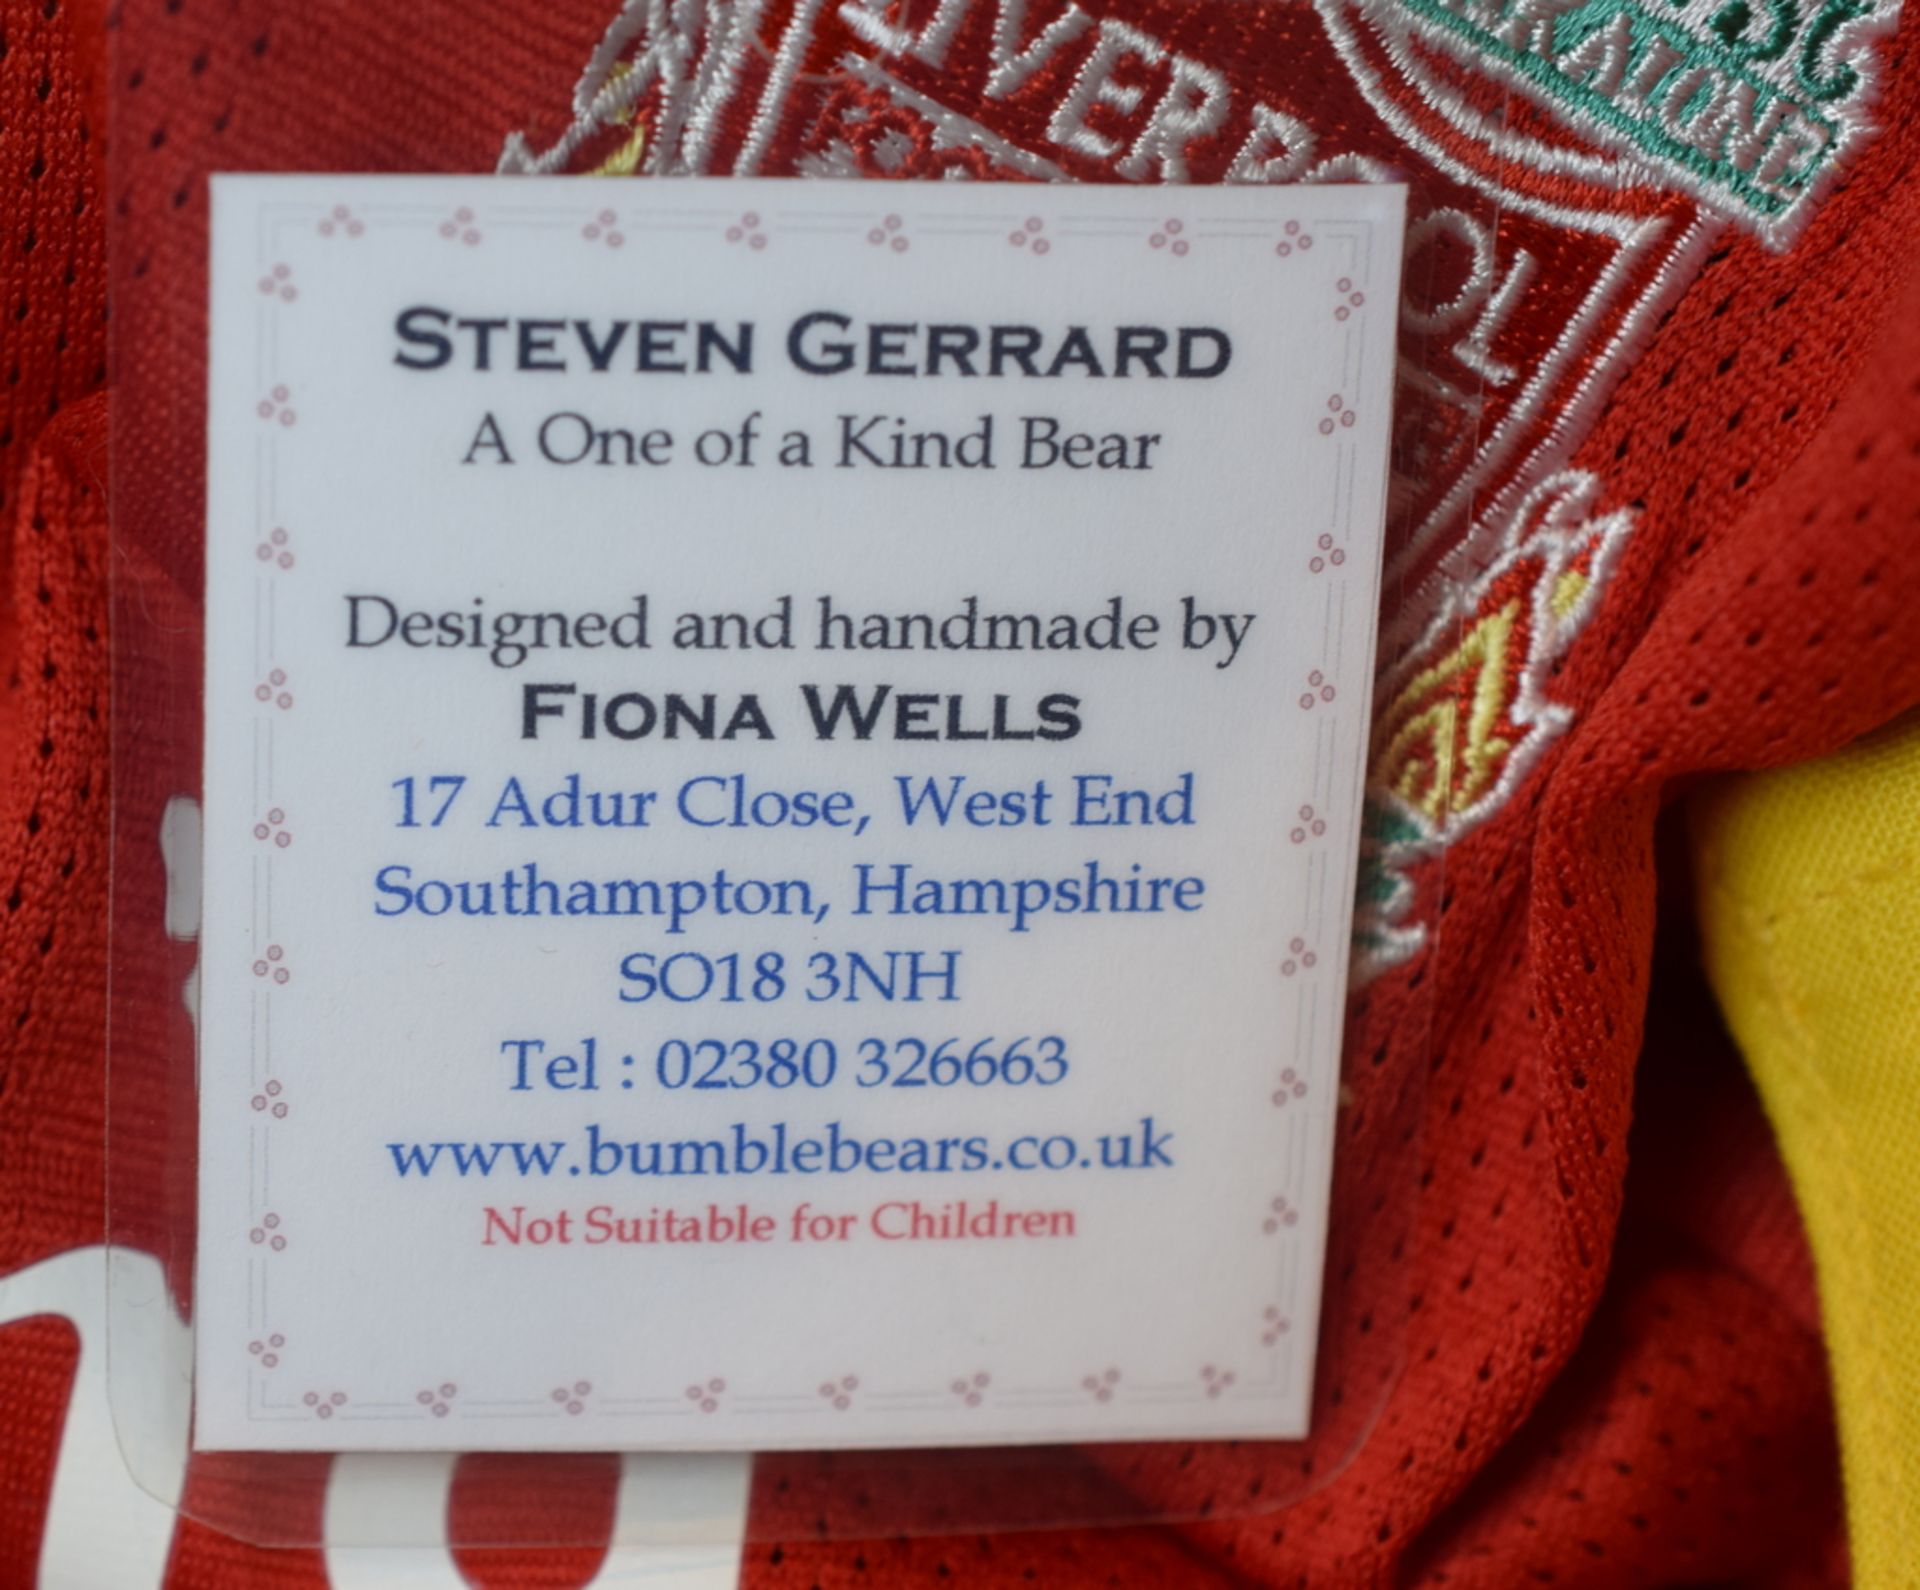 Steven Gerrard One Of A Kind Bear By Fiona Wells - Image 5 of 5